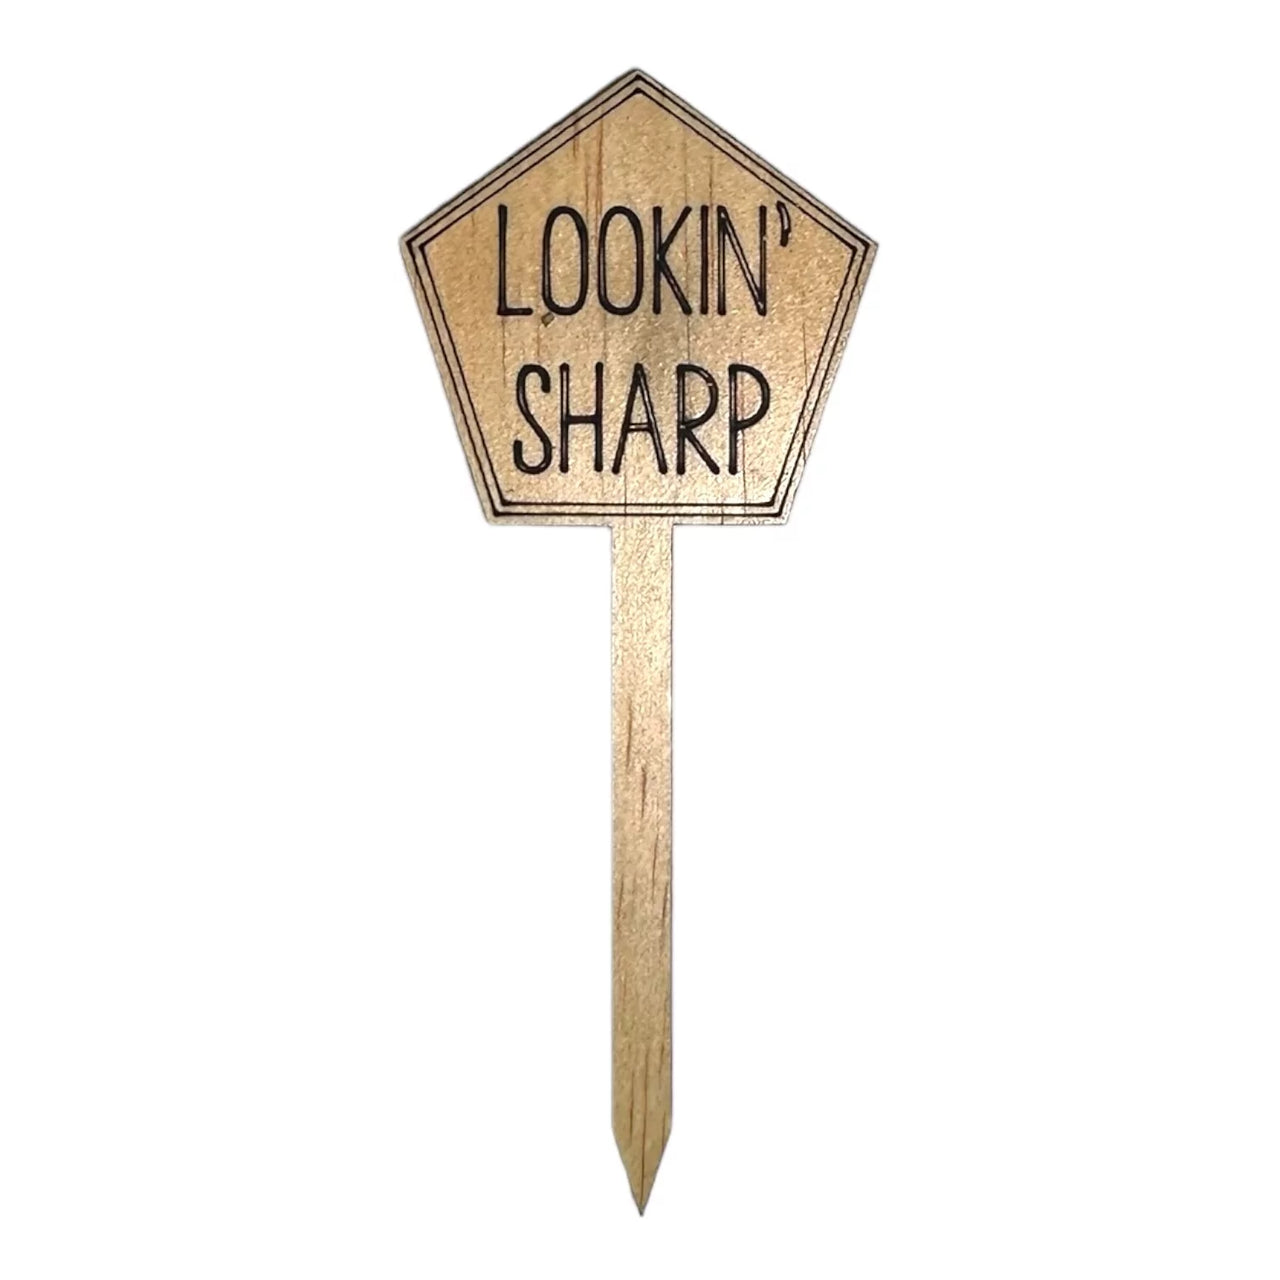 Funny Plant Stakes - Made from Sustainable Timber - Looking Sharp